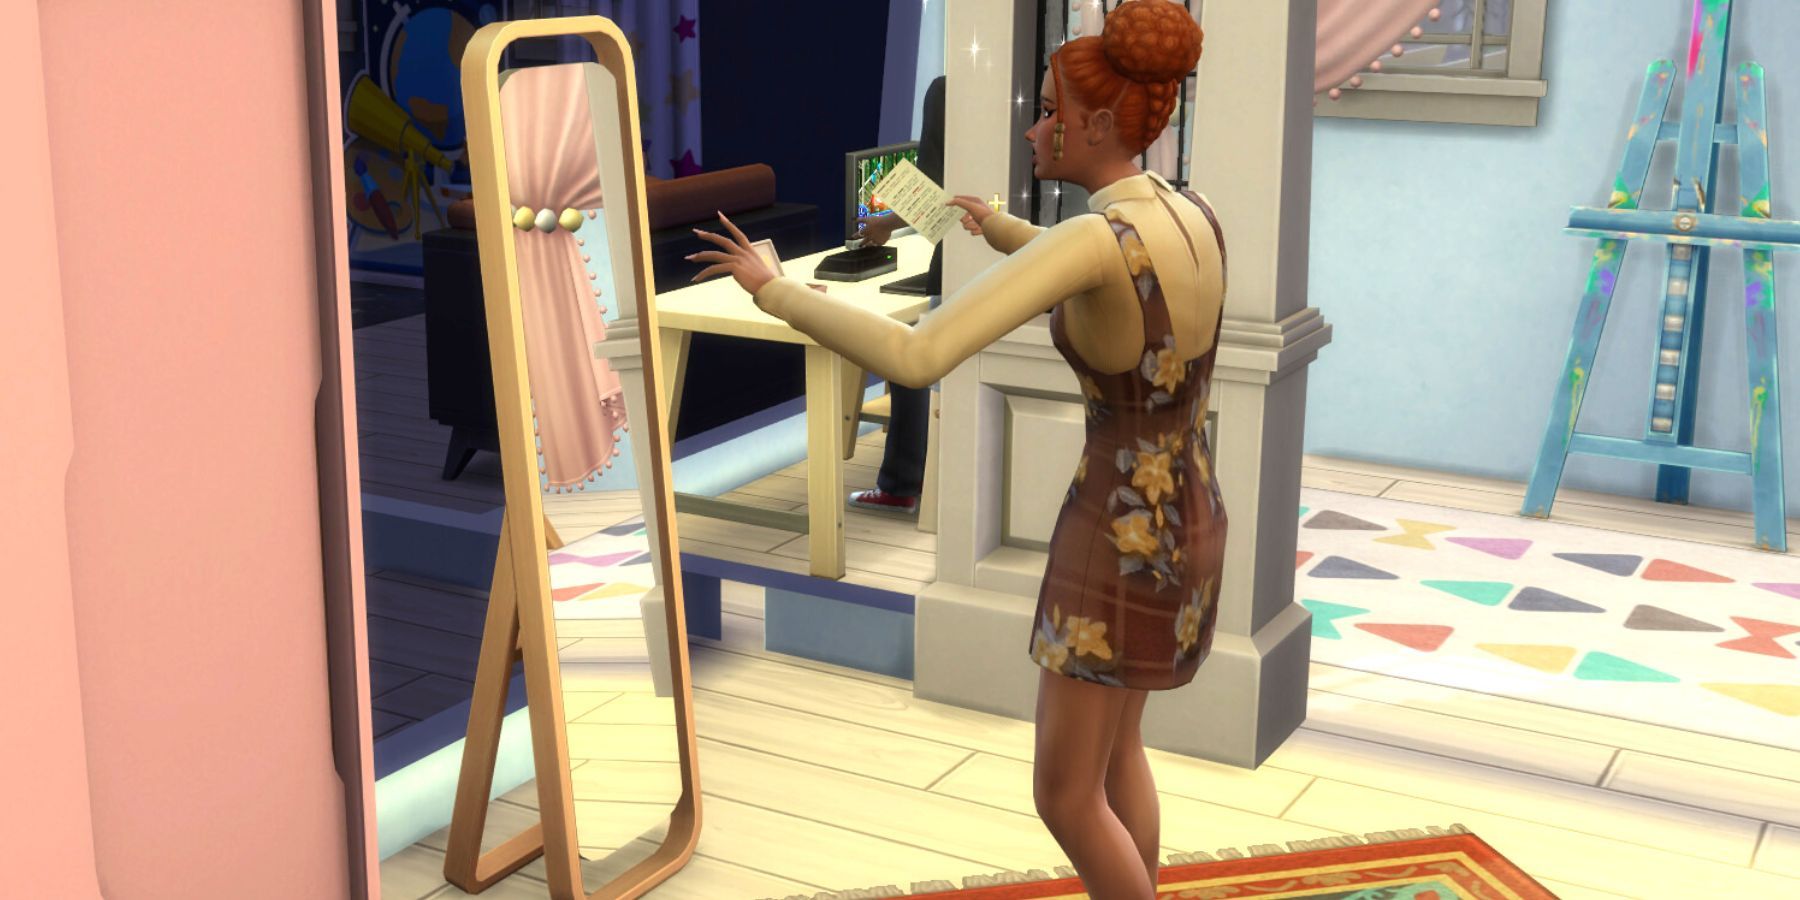 The Sims 4: Get Famous - Acting Skill